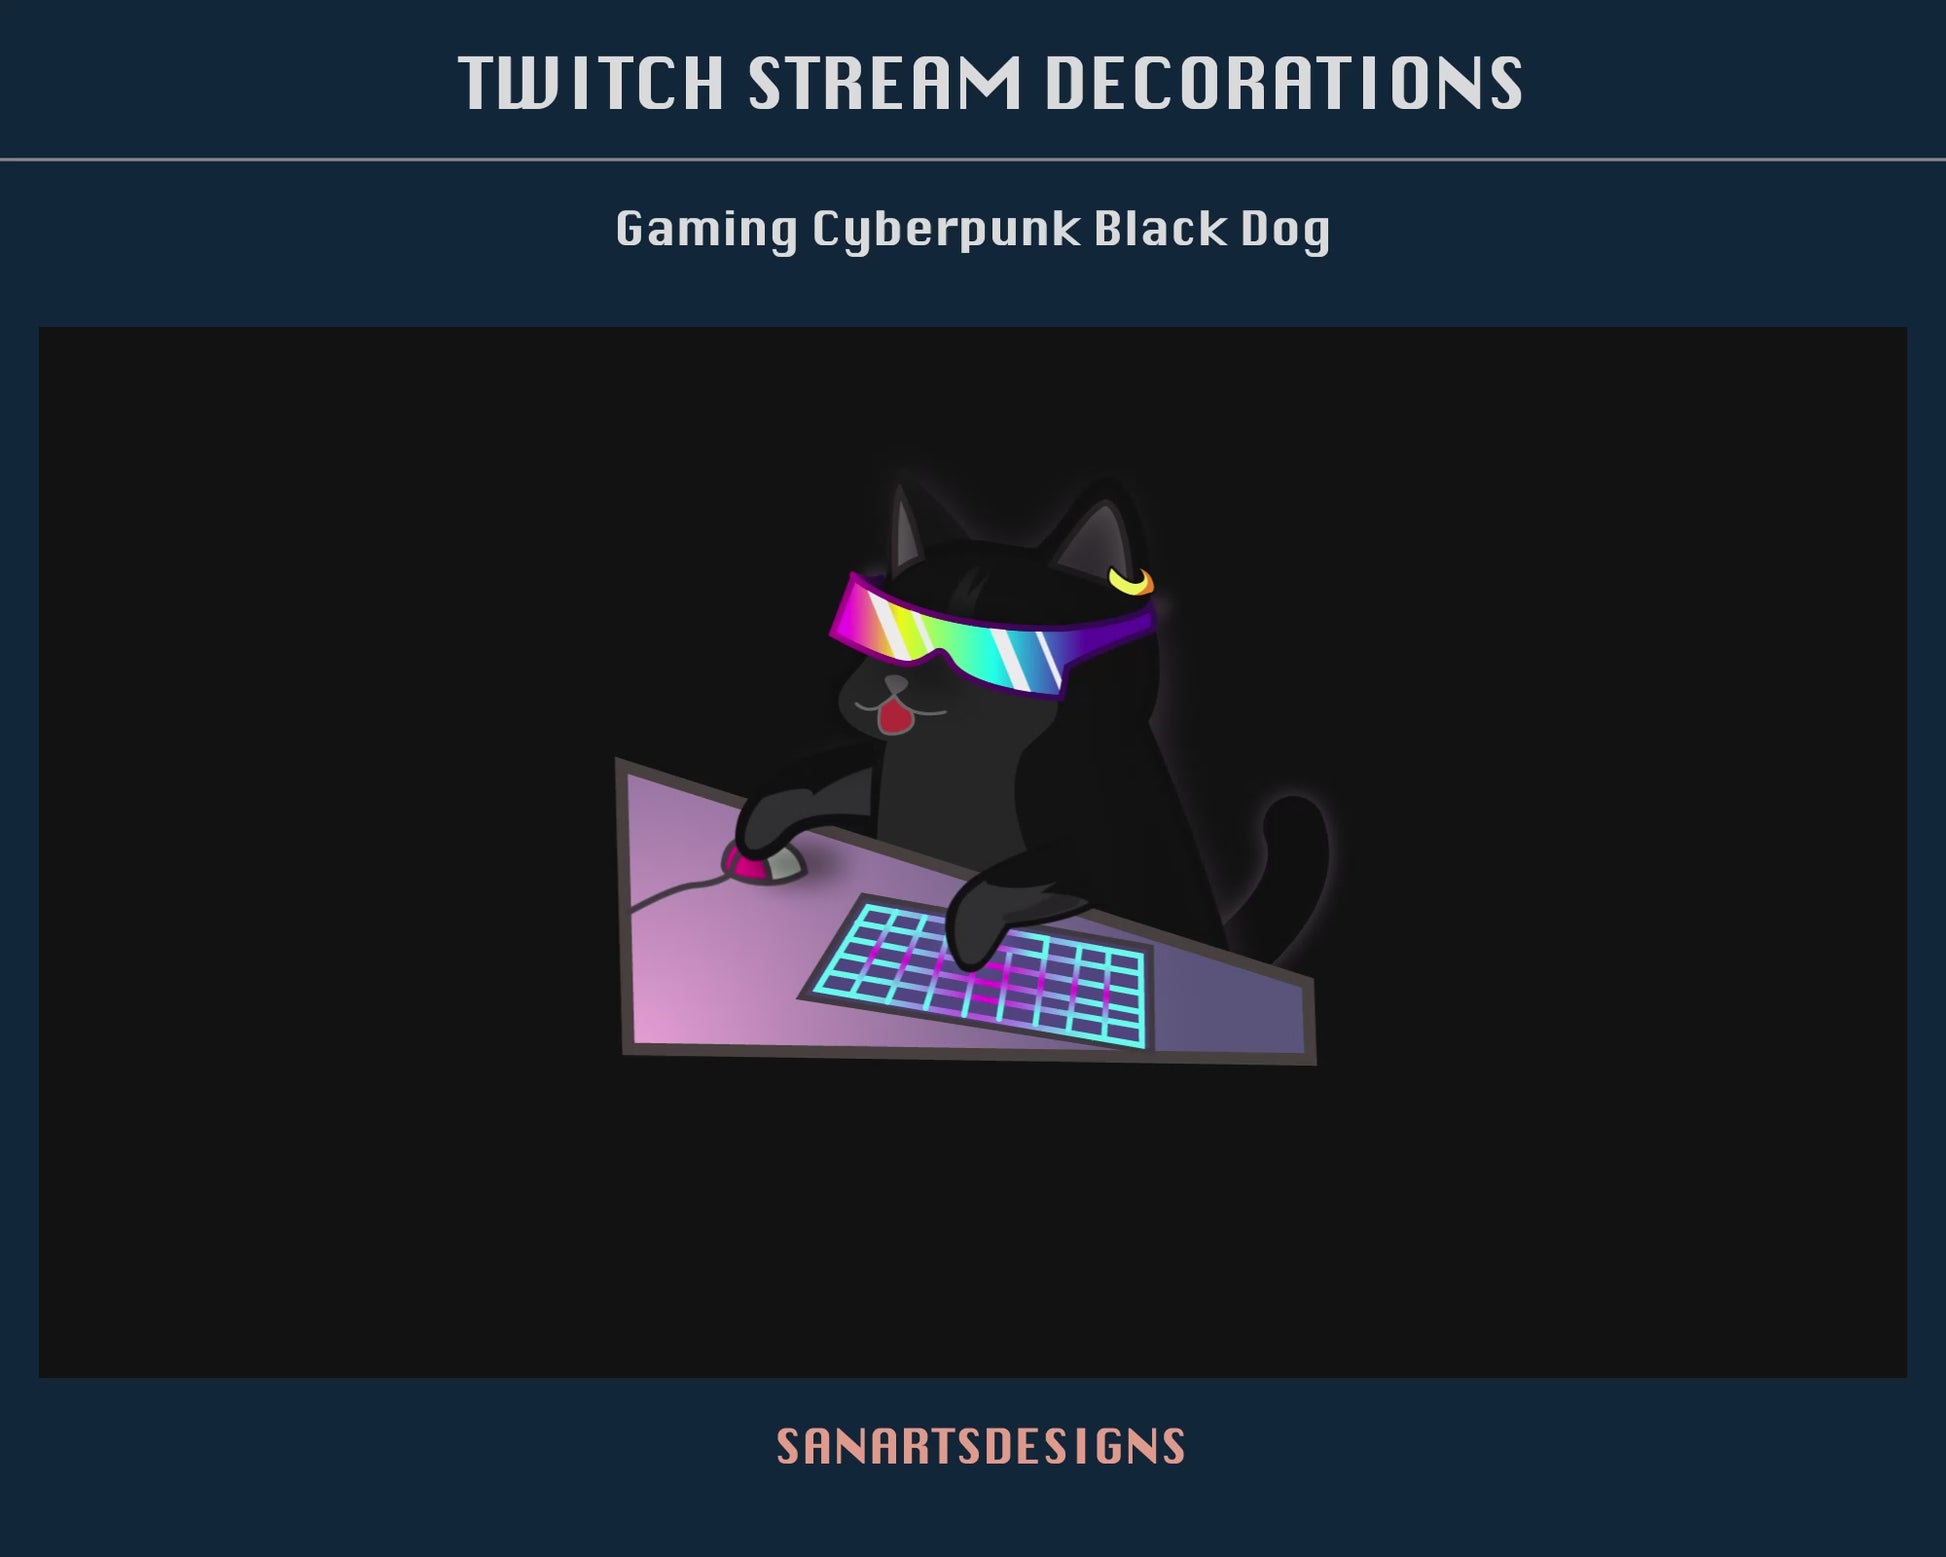 Cute Gaming Cyber BLACK Dog Animated Stream Decorations